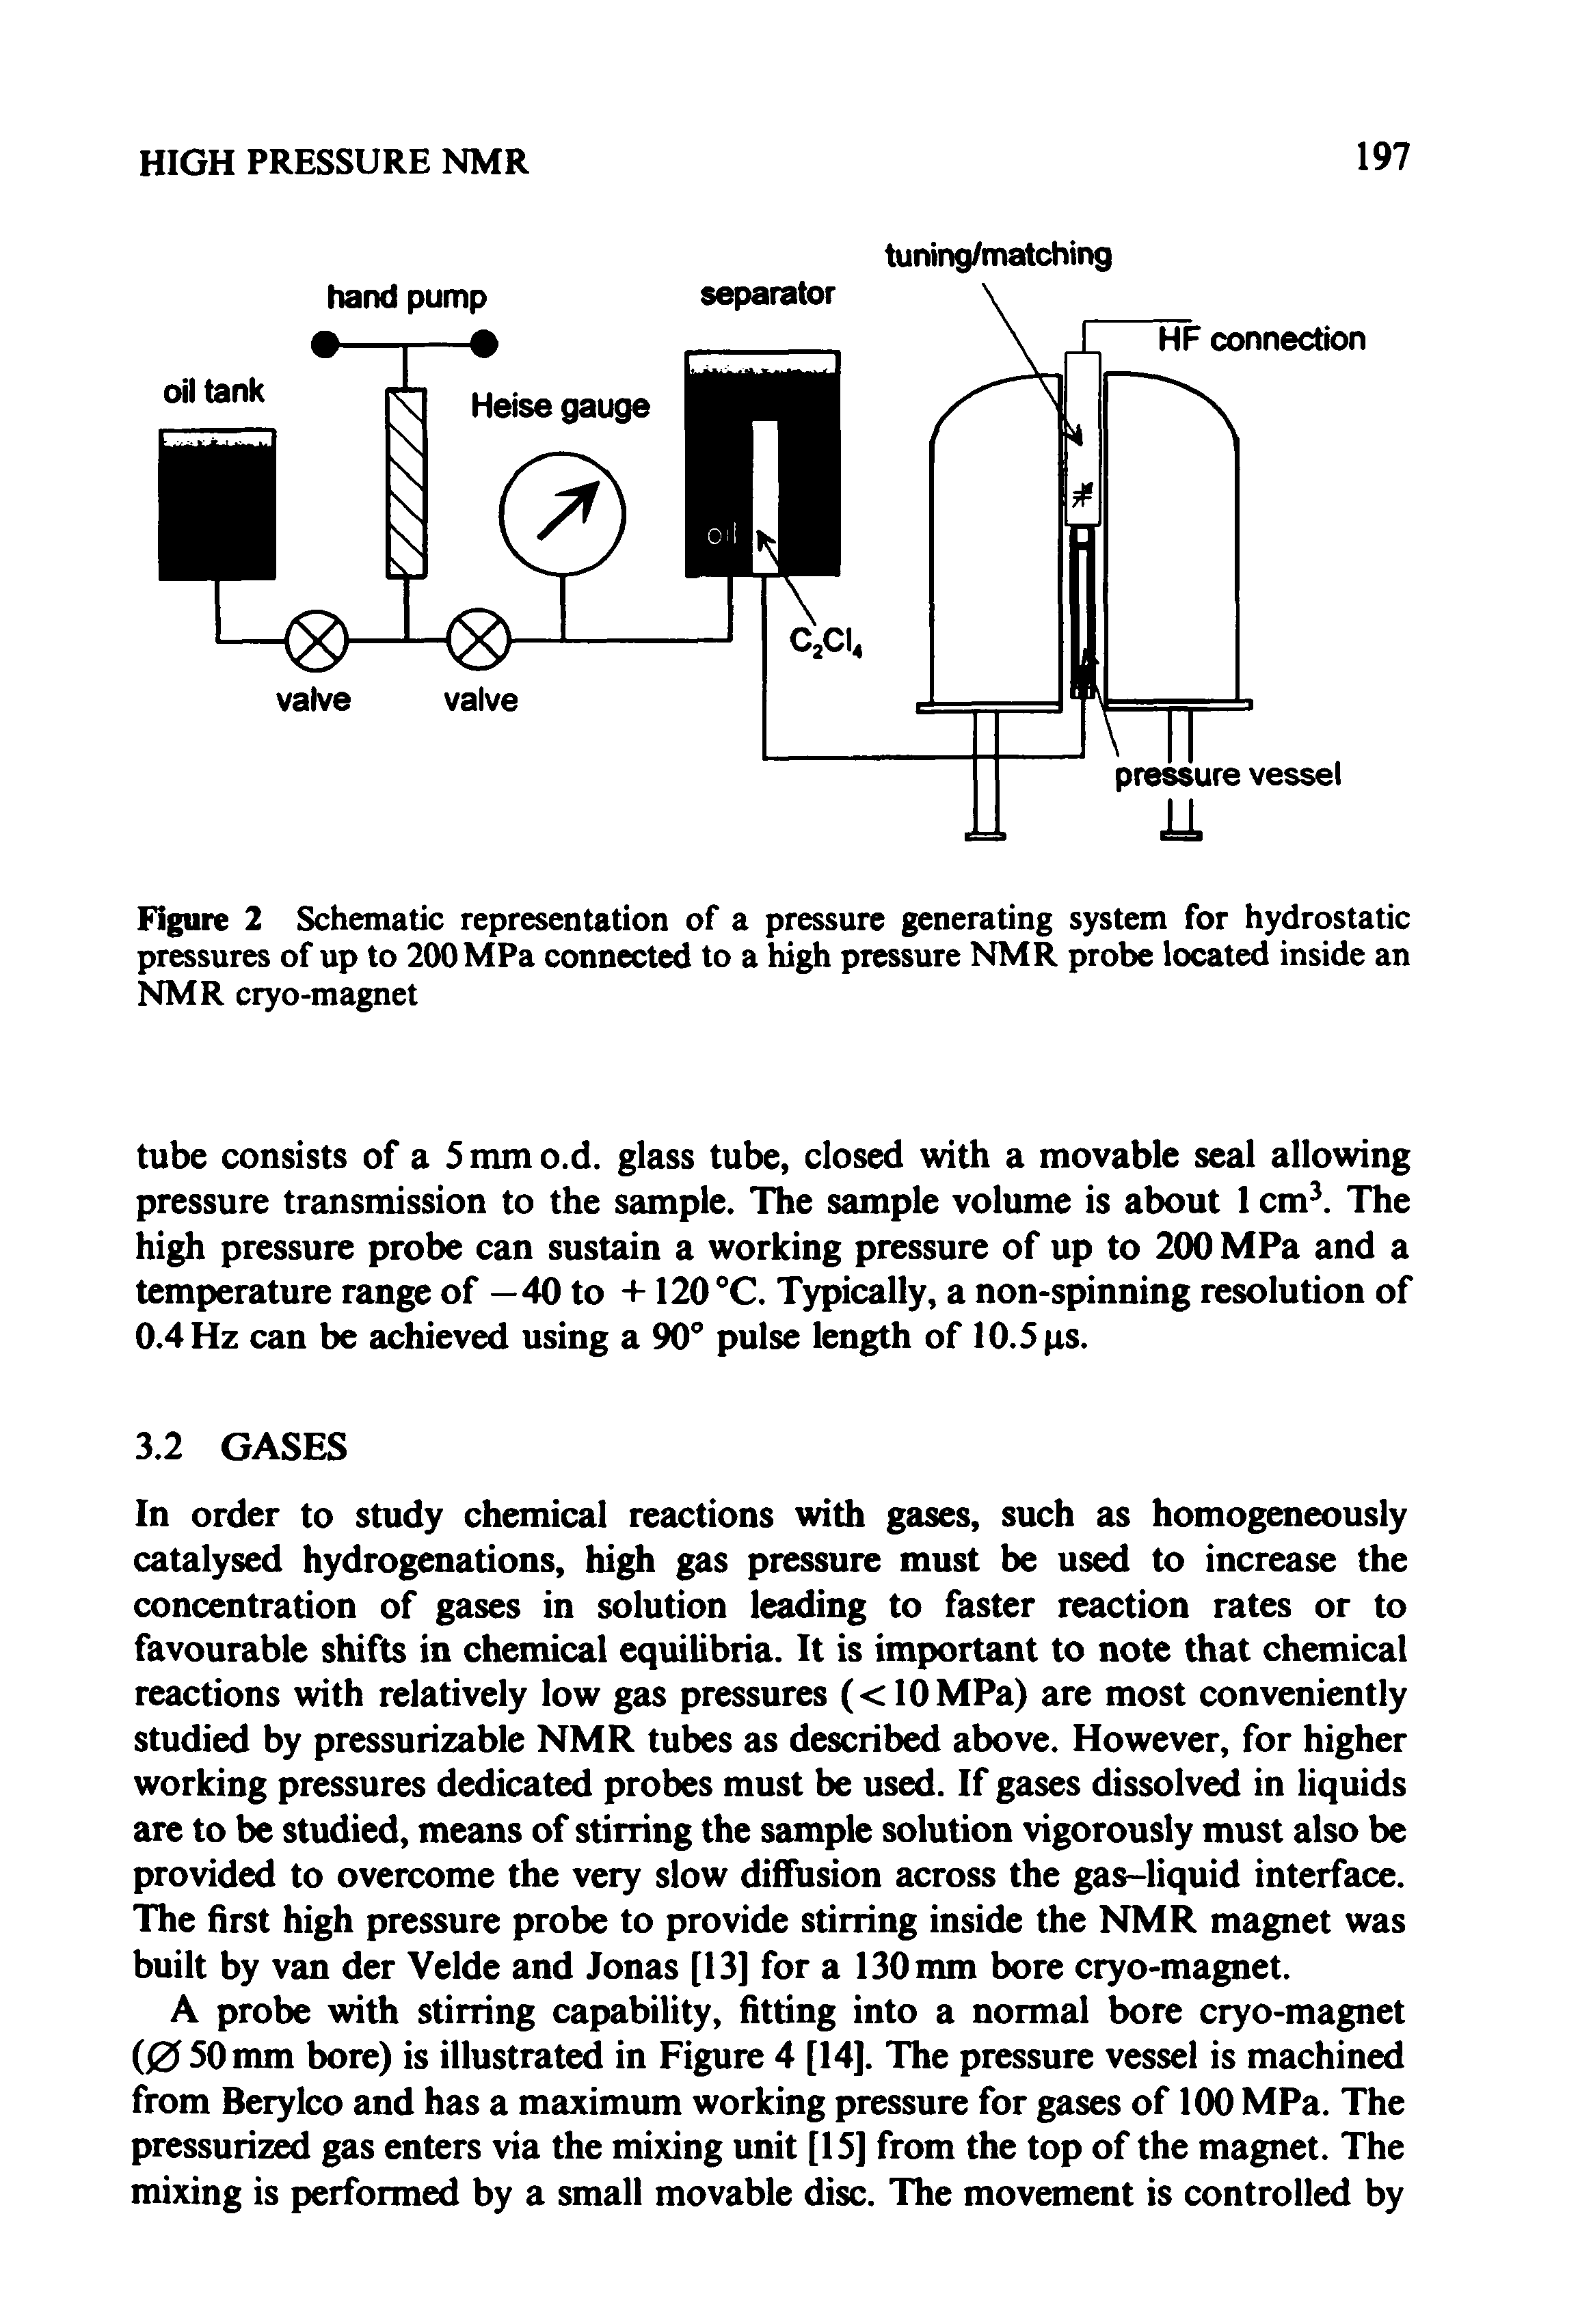 Figure 2 Schematic representation of a pressure generating system for hydrostatic pressures of up to 200 MPa connected to a high pressure NMR probe located inside an NMR cryo-magnet...